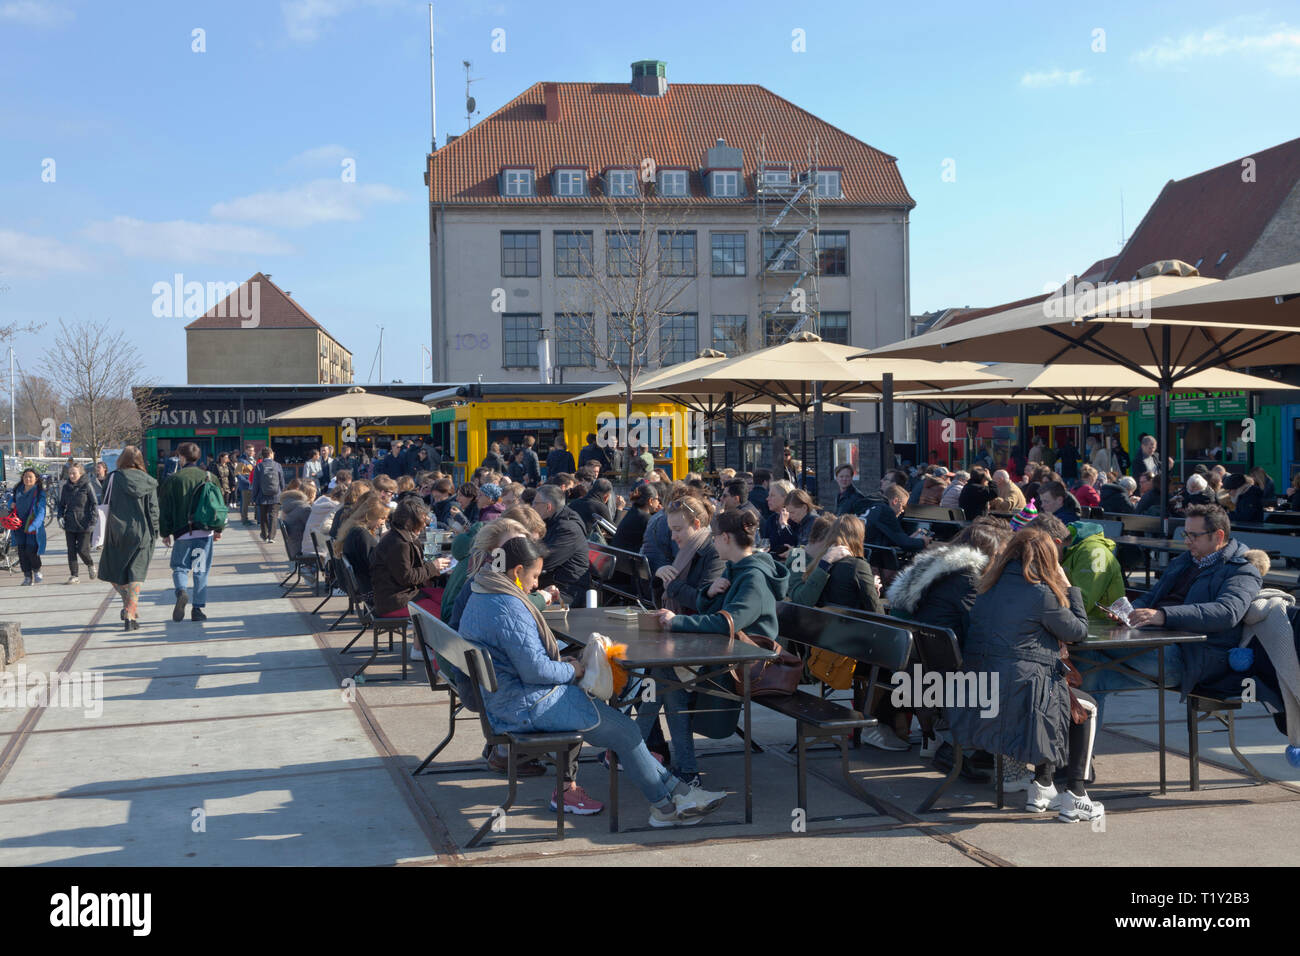 Broens Gadekøkken, the Bridge Street Kitchen, Christianshavn, at the end of the inner harbour bridge, on the opening day in spring. warm and sunny Stock Photo